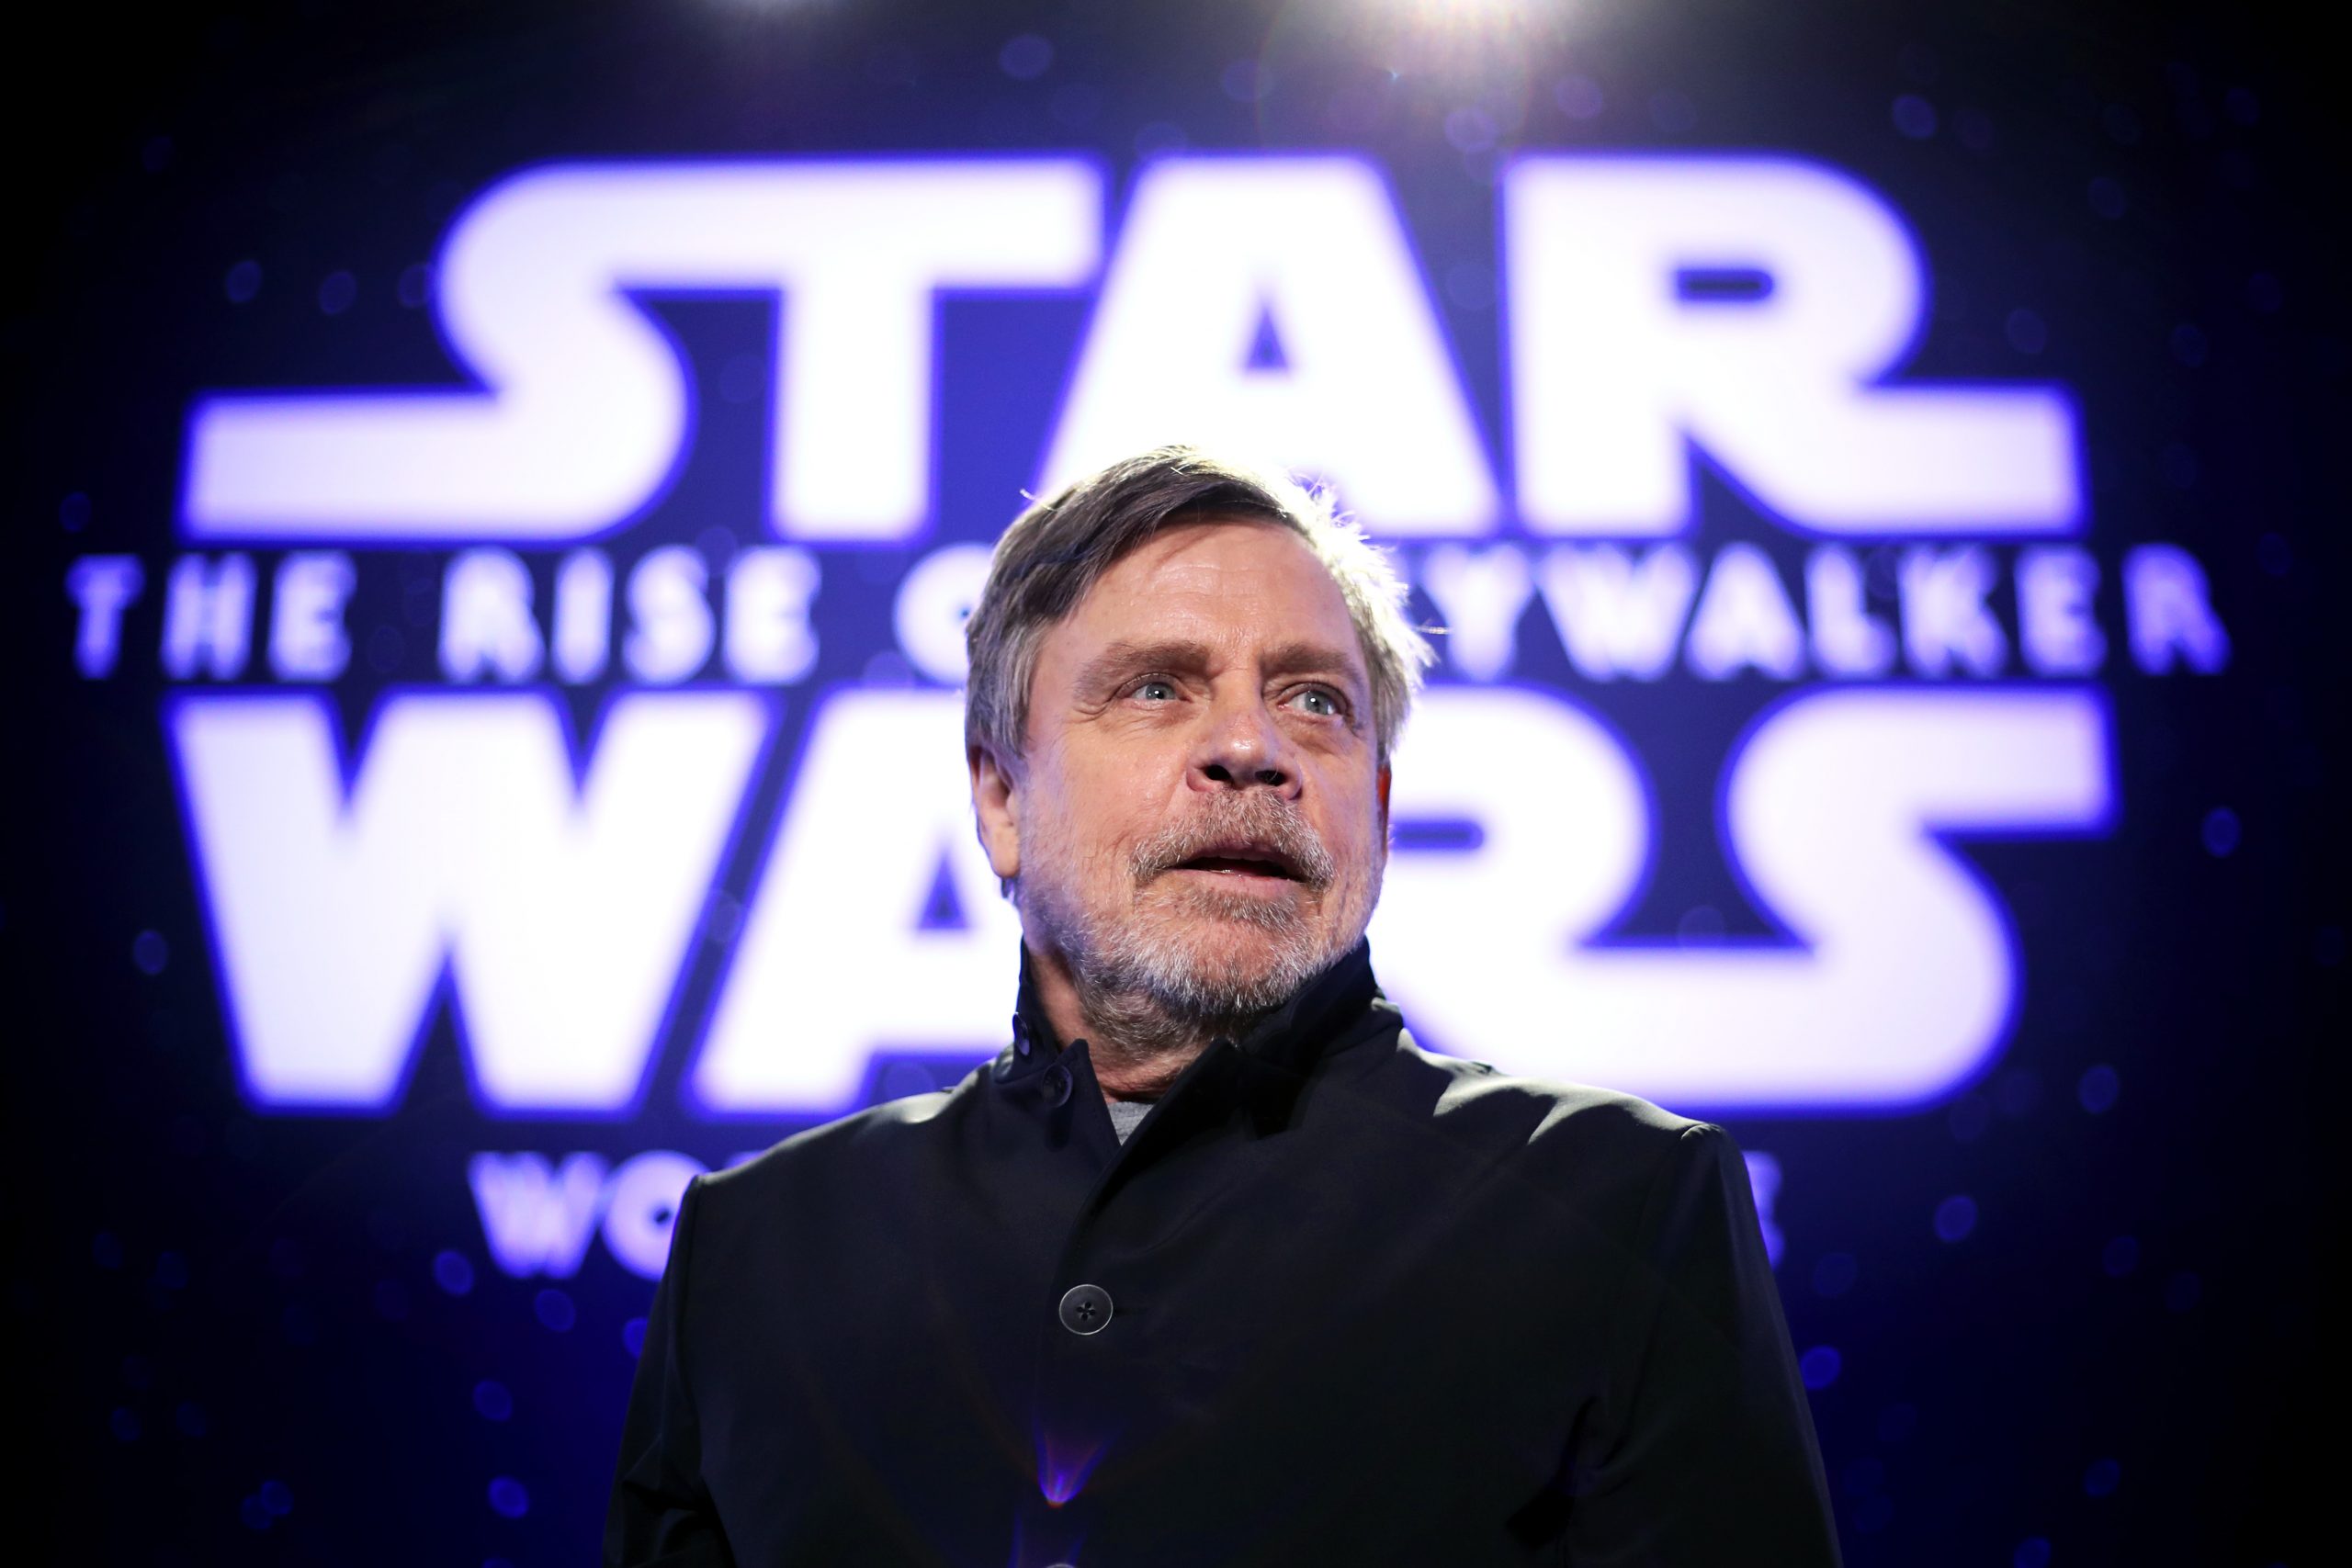 Mark Hamill's Ear Saved His Crushed Nose After Grisly Car Crash